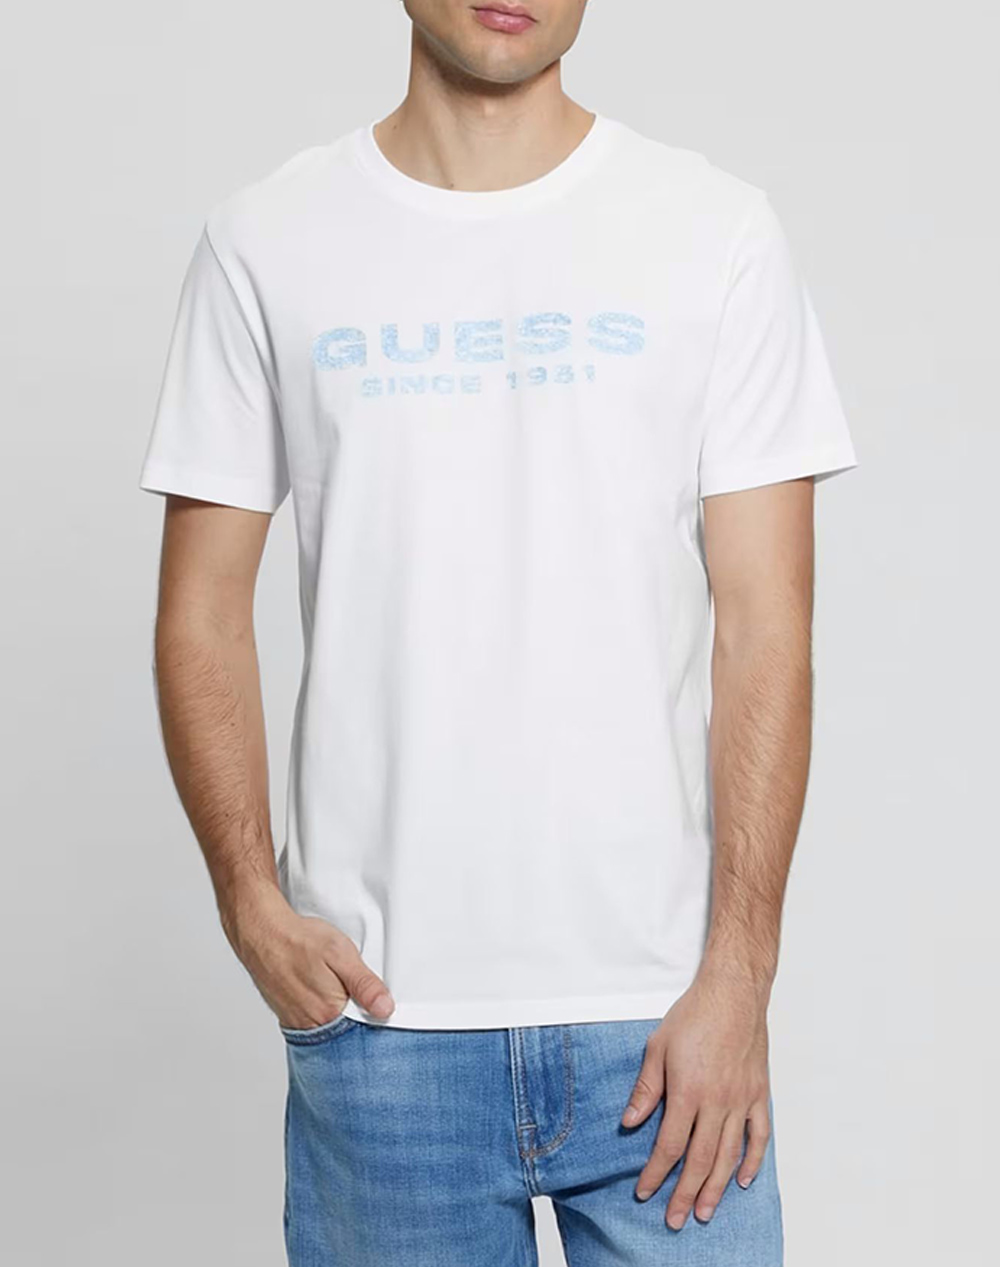 GUESS SS CN GUESS LOGO TEE ΜΠΛΟΥΖΑ ΑΝΔΡΙΚΟ